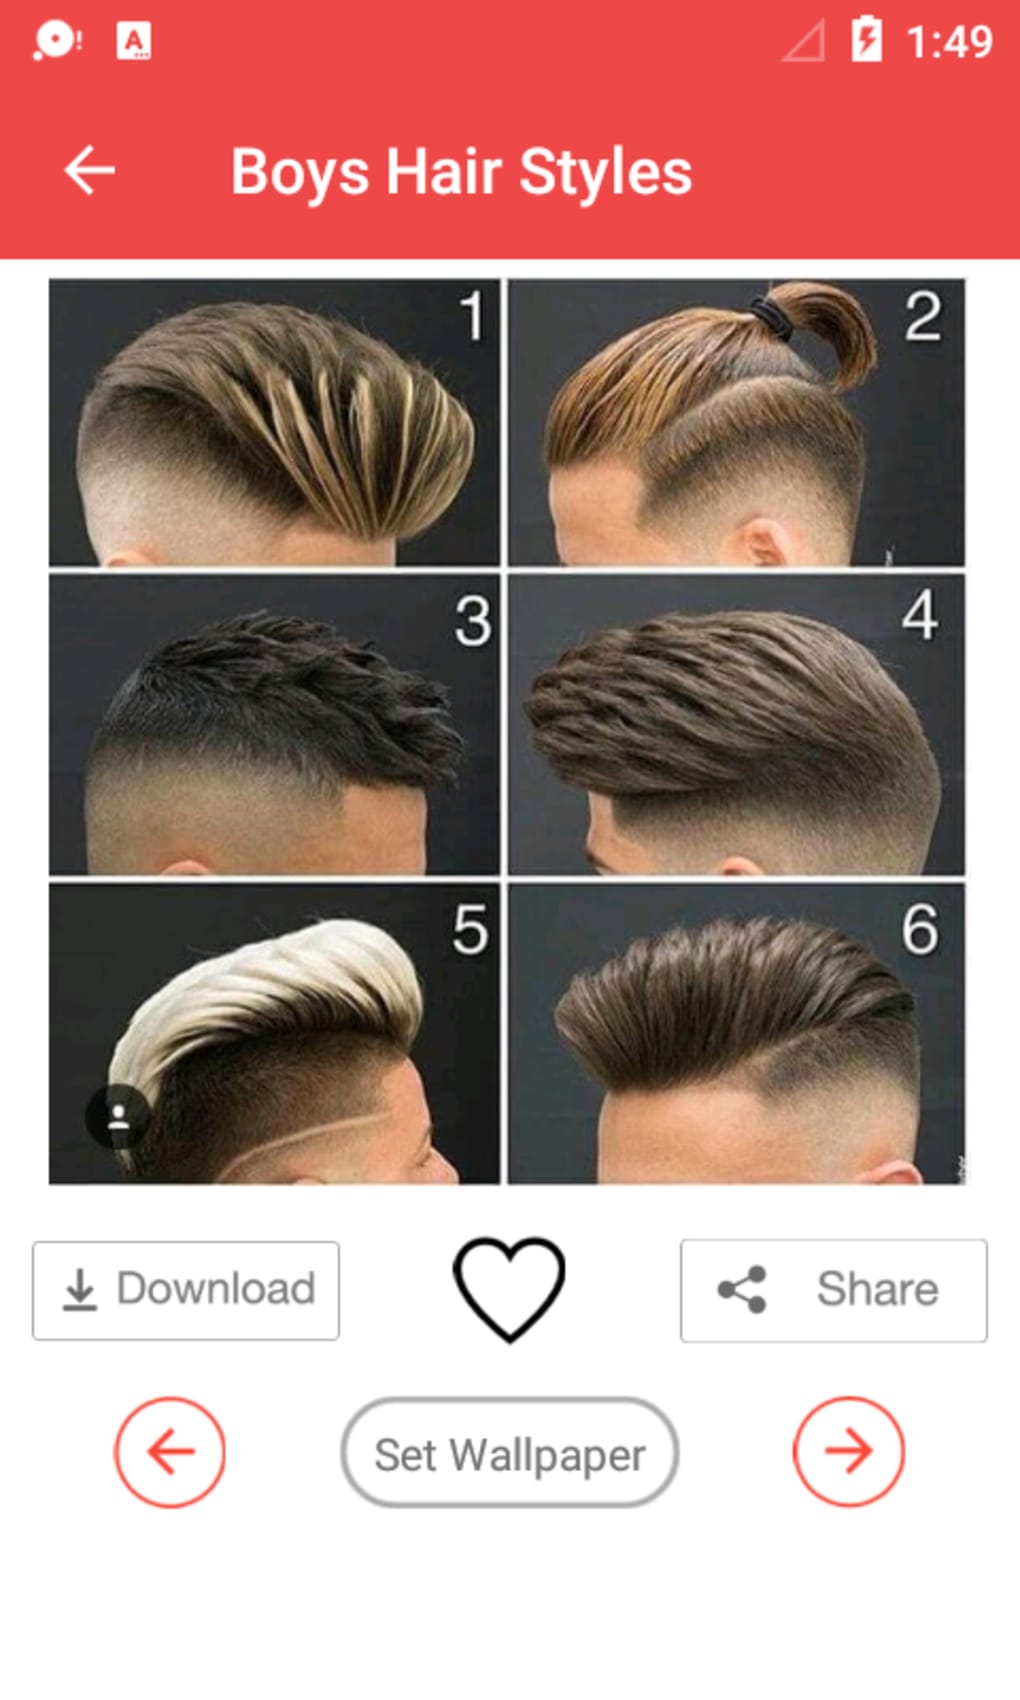 Men Styles Background, How To Cut A Men S Hair In 2018 Haircut, Male  Haircut Style Pictures, Hair Background Image And Wallpaper for Free  Download